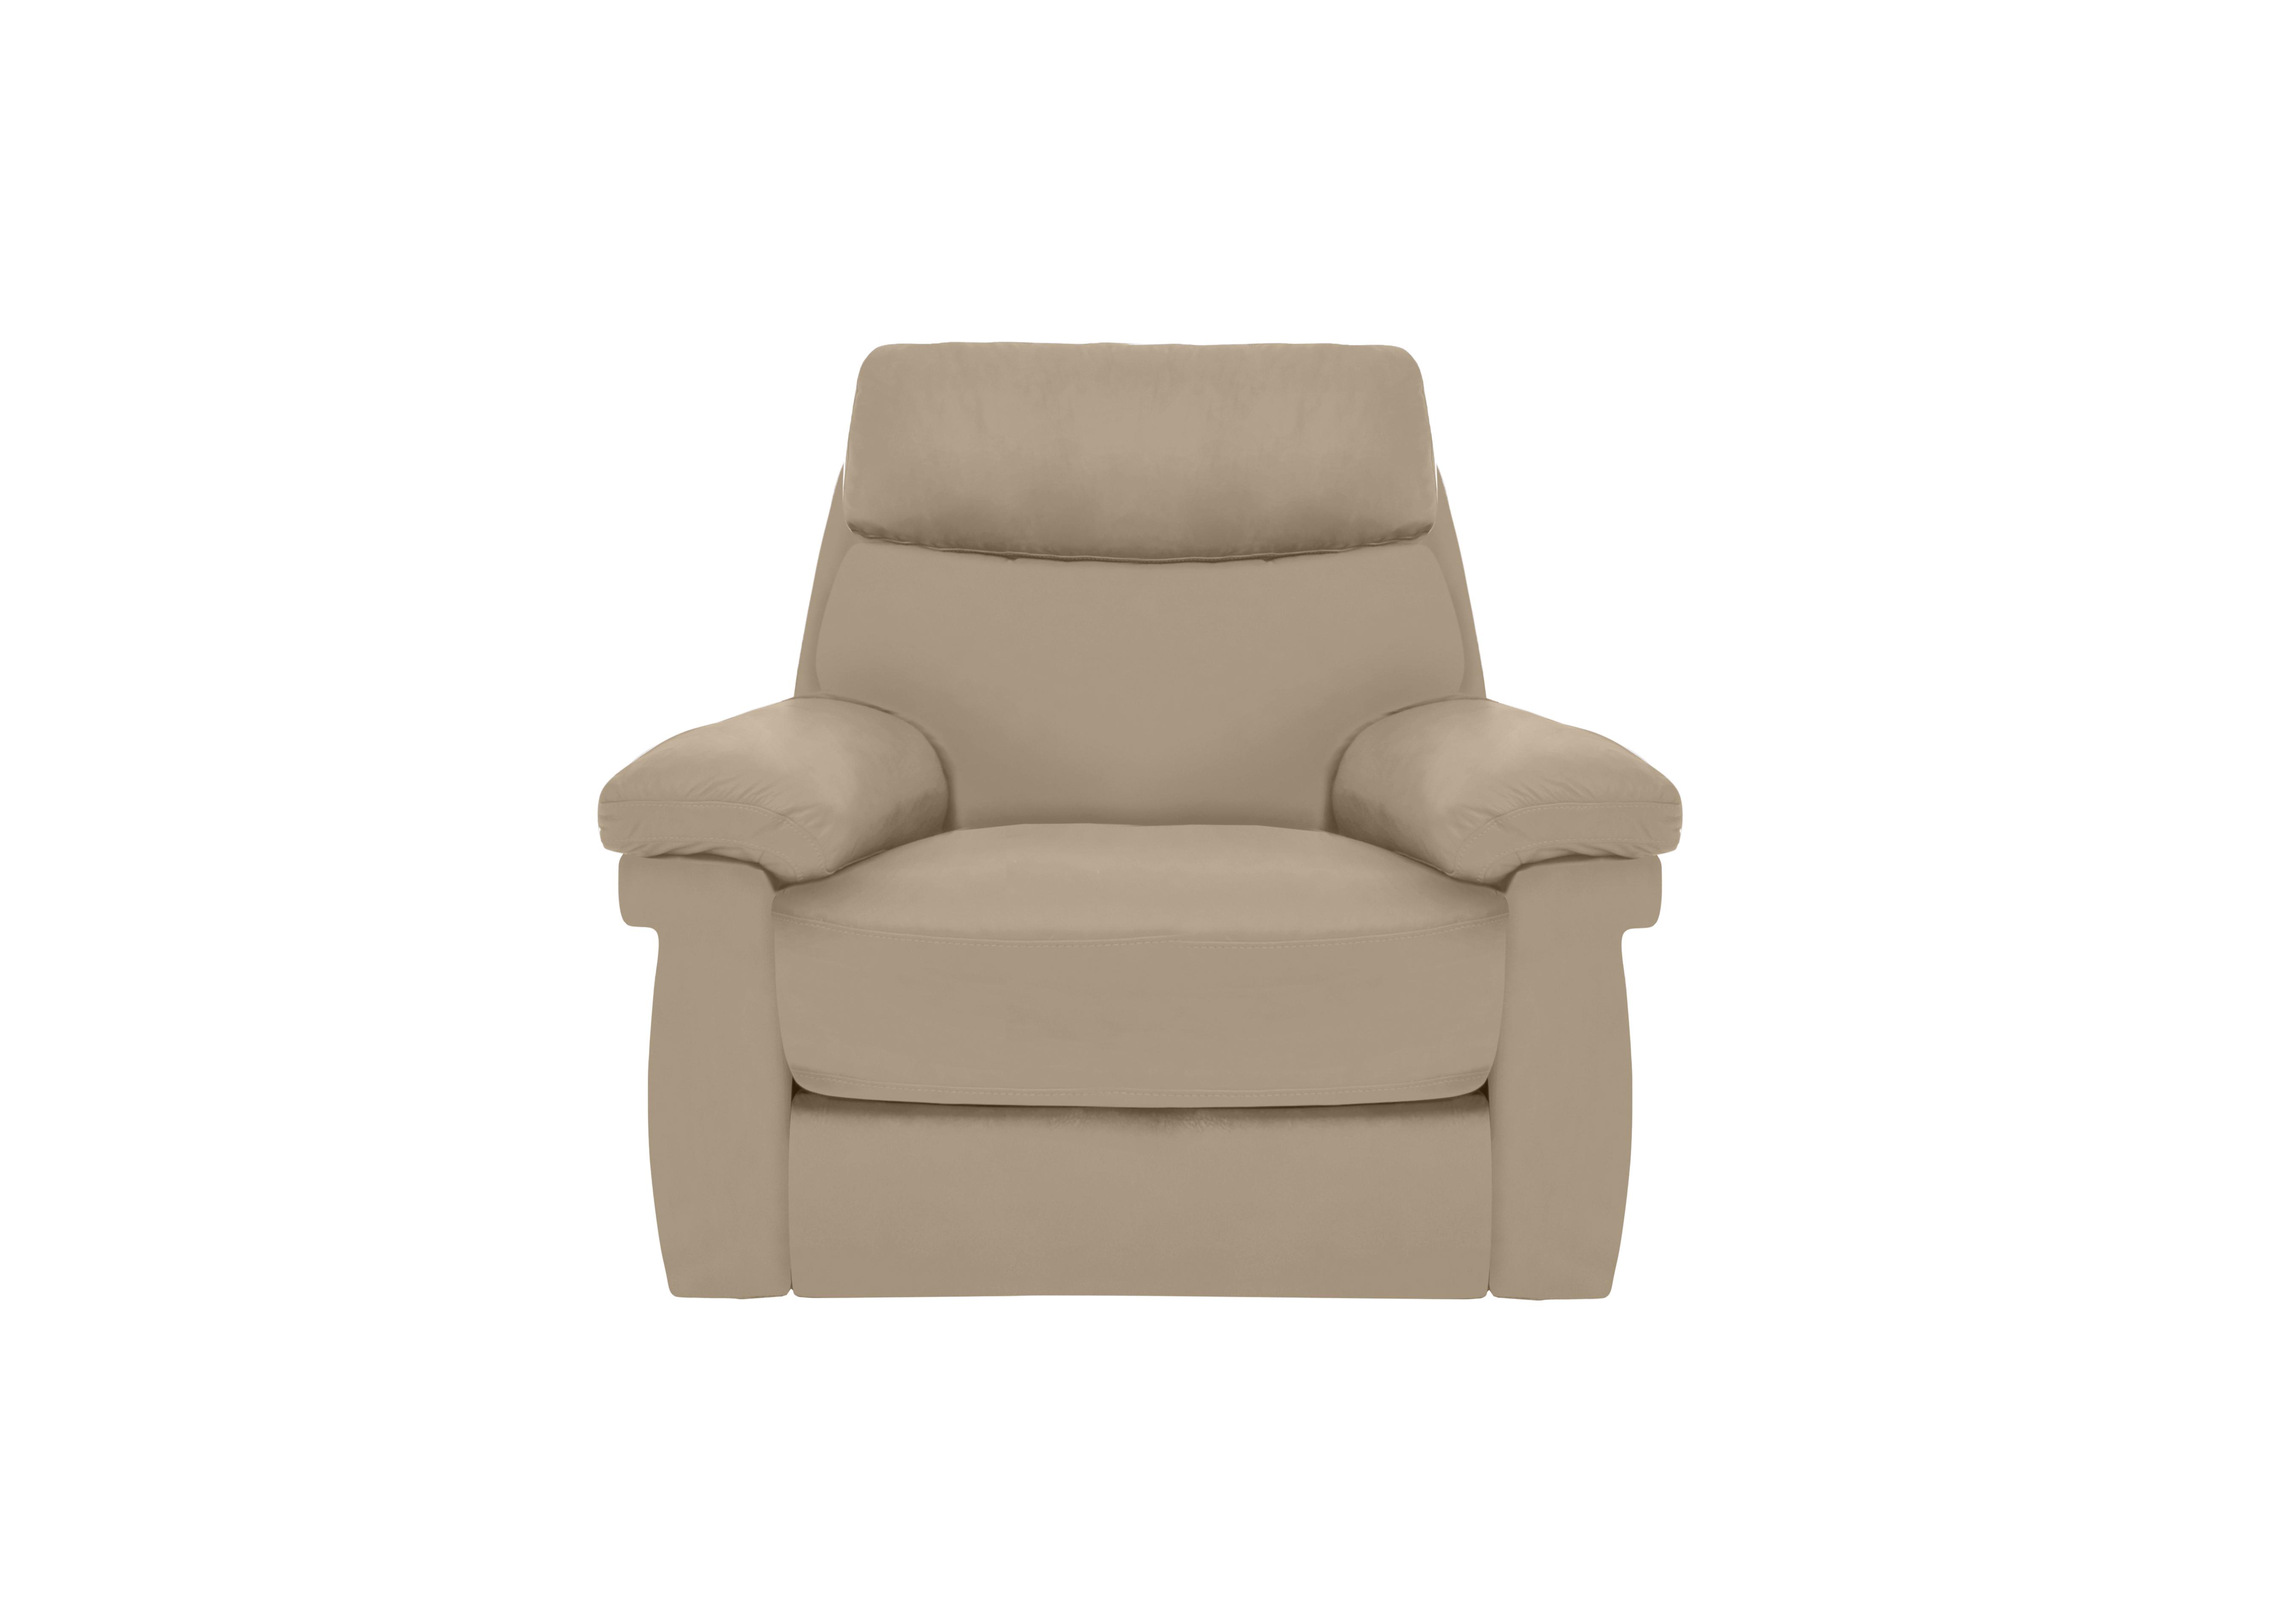 Serene Leather Power Recliner Chair with Power Headrest in Bx-039c Pebble on Furniture Village